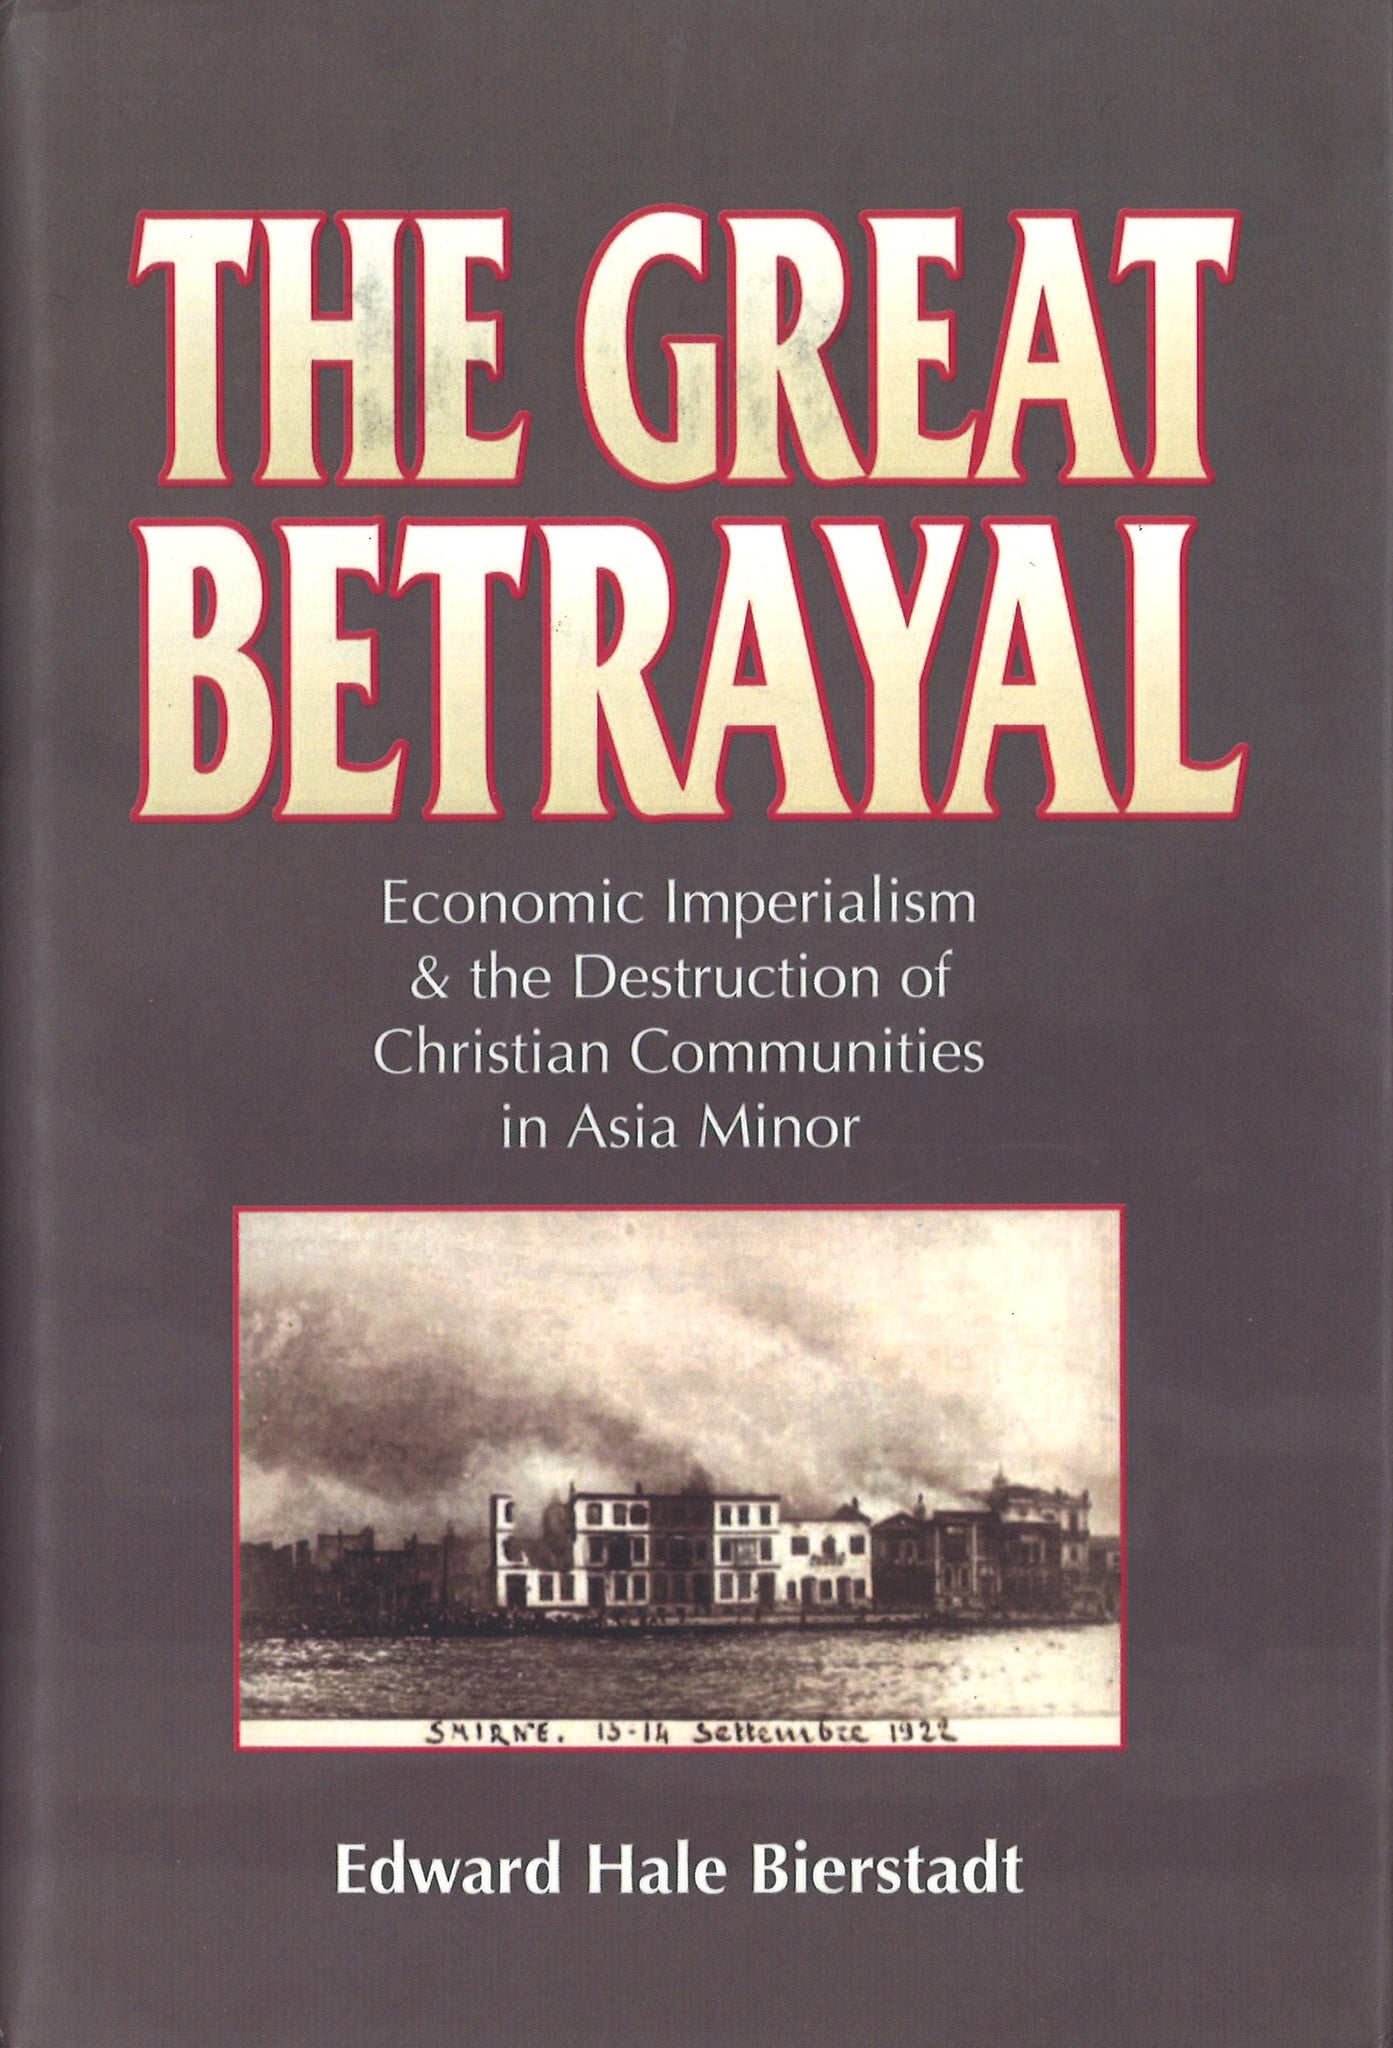 GREAT BETRAYAL, THE: Economic Imperialism & Destruction of Christian Communities in Asia Minor